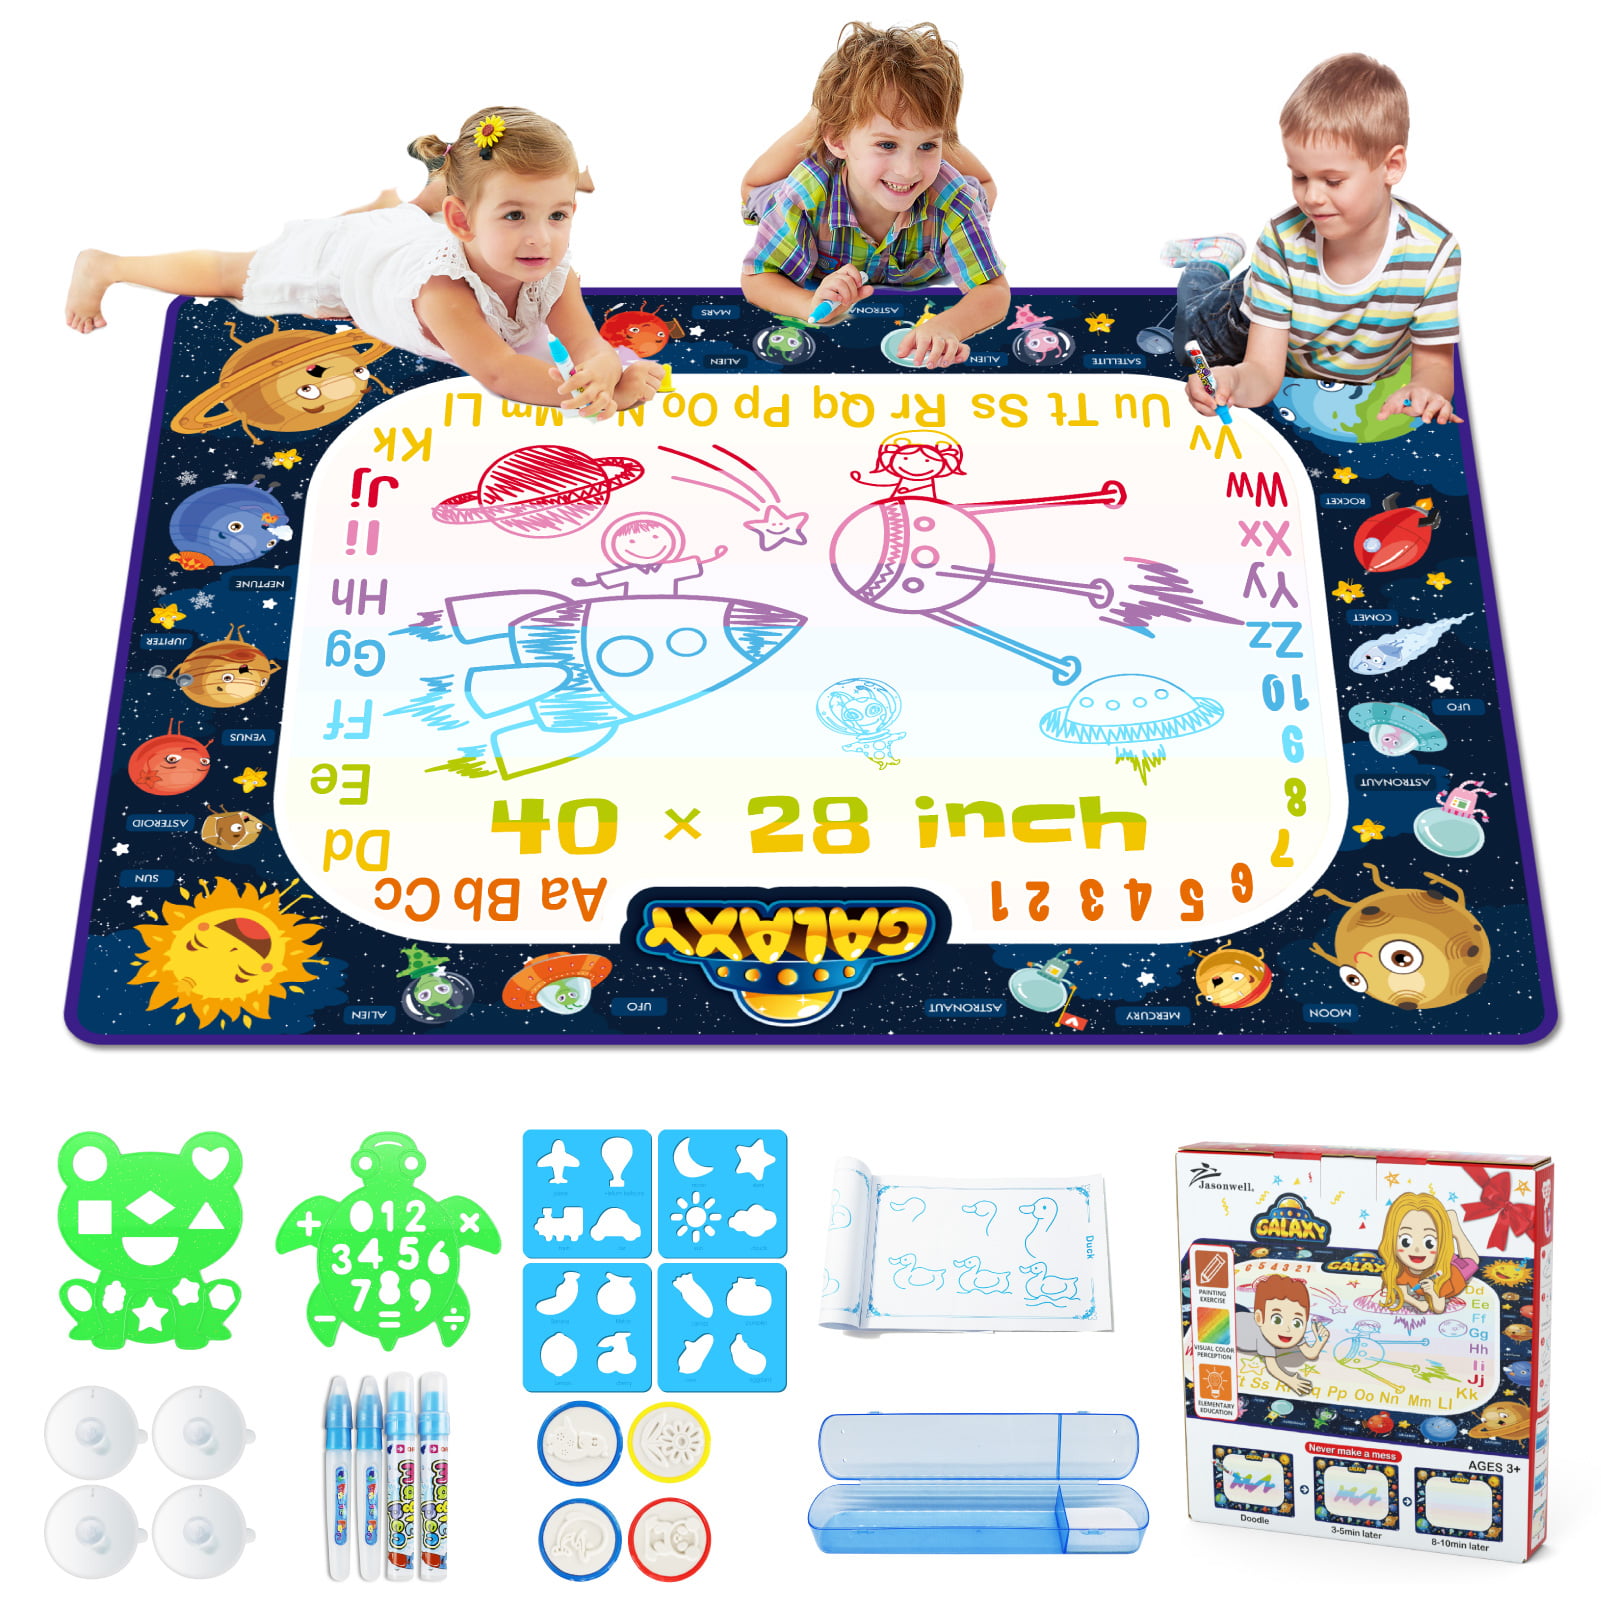 Aqua Magic Doodle Mat 40 x 28 Inches Kids Doodling Mats Water Drawing Writing Board Toy for Kid Toddler Animal Educational Painting Pad Toys for Age 3 4 5 6 7 8 9 10 11 12 Girls Boys Toddlers Gift 